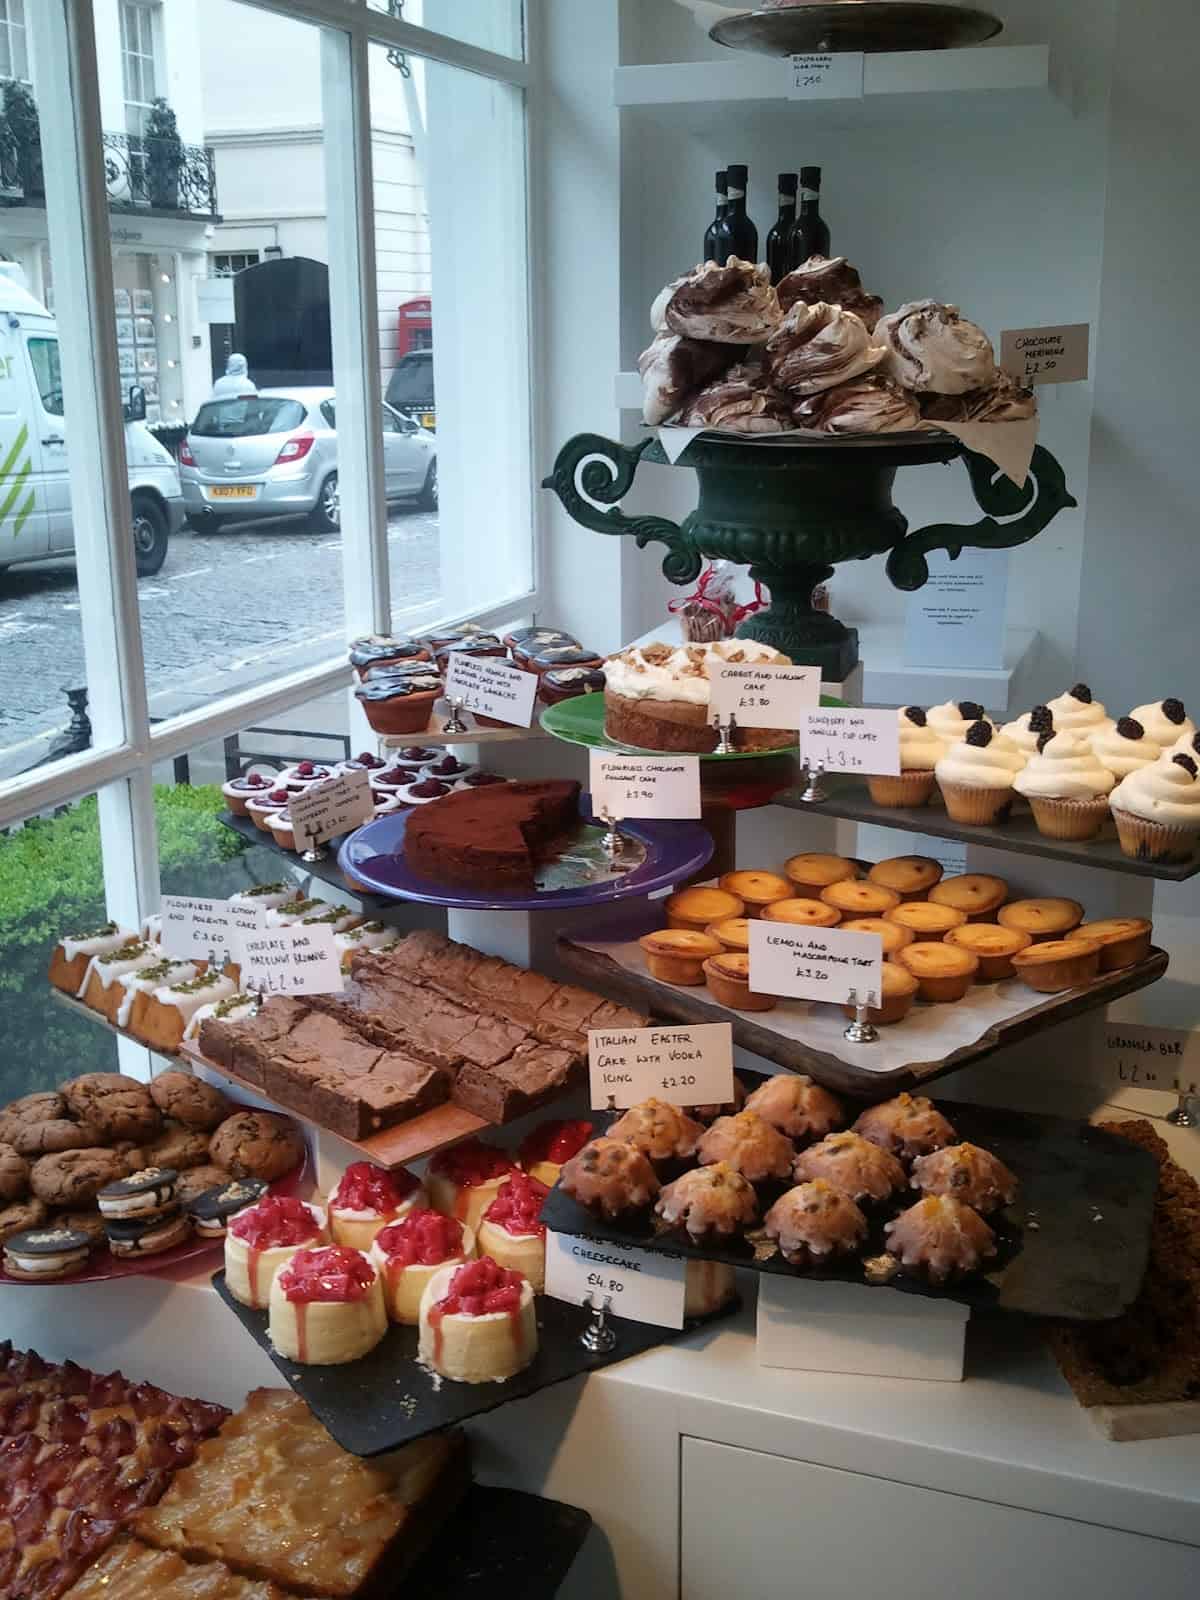 Ottolenghi - Selection of pastries in the shop window